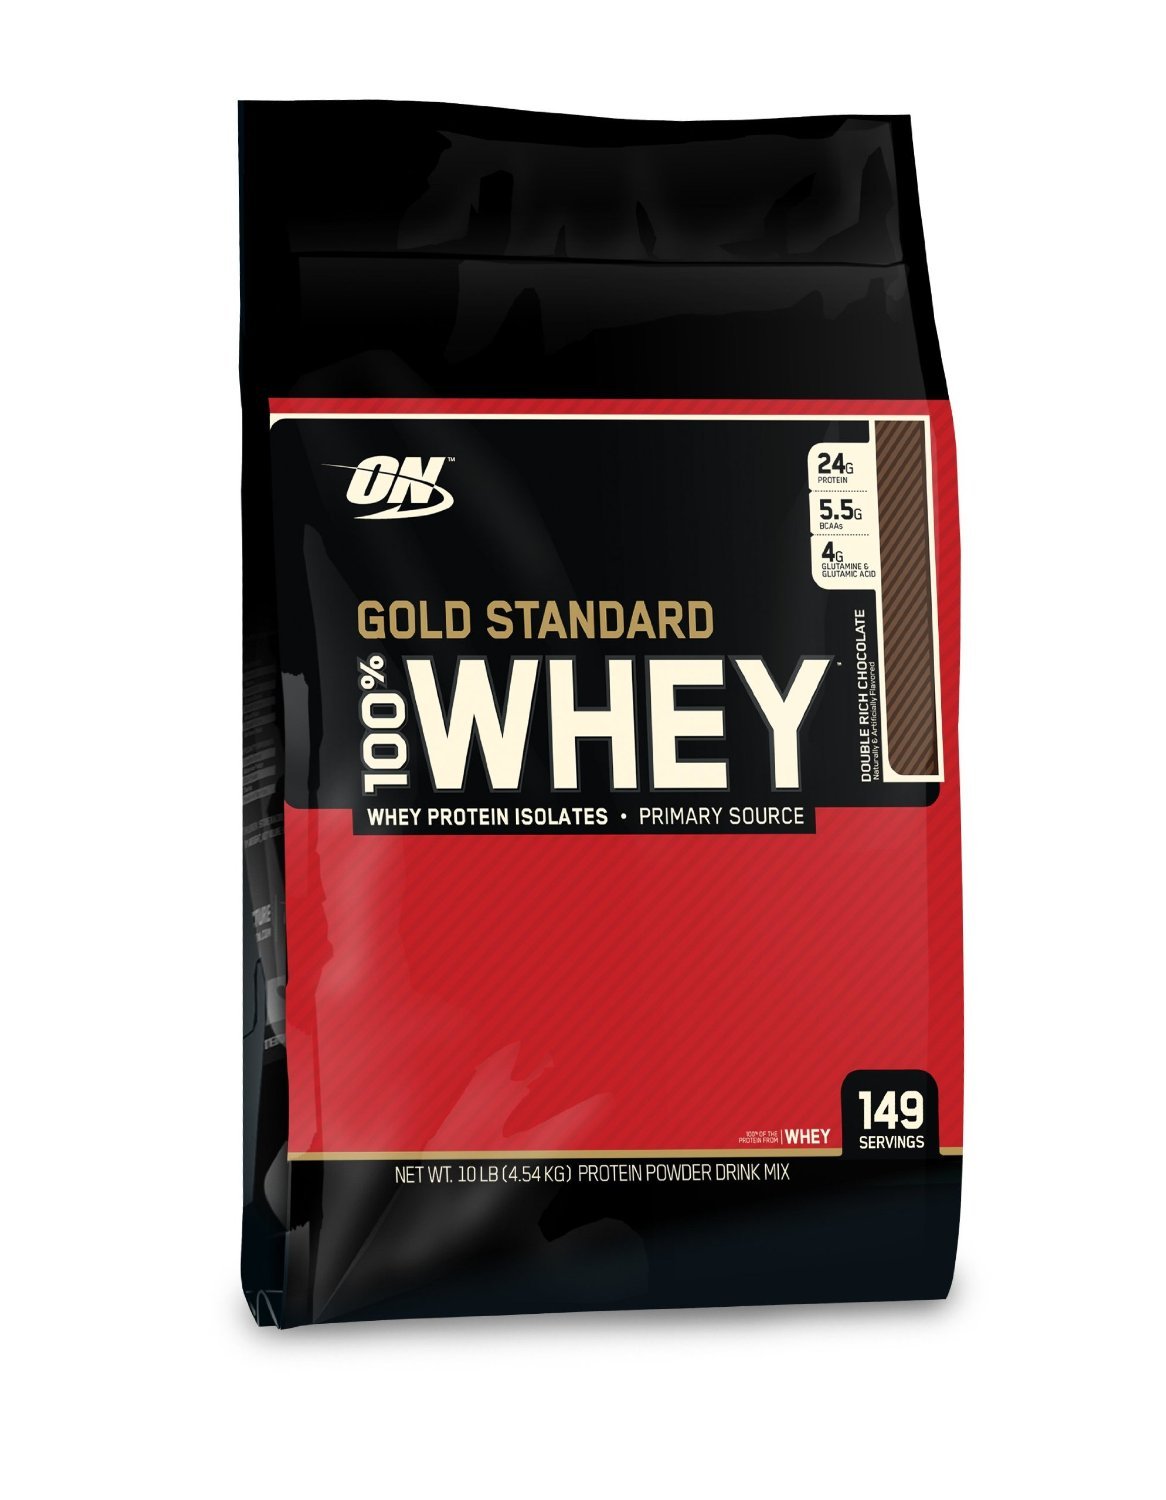 100% Whey Gold Standard, 4704 g, Optimum Nutrition. Whey Protein. recovery Anti-catabolic properties Lean muscle mass 